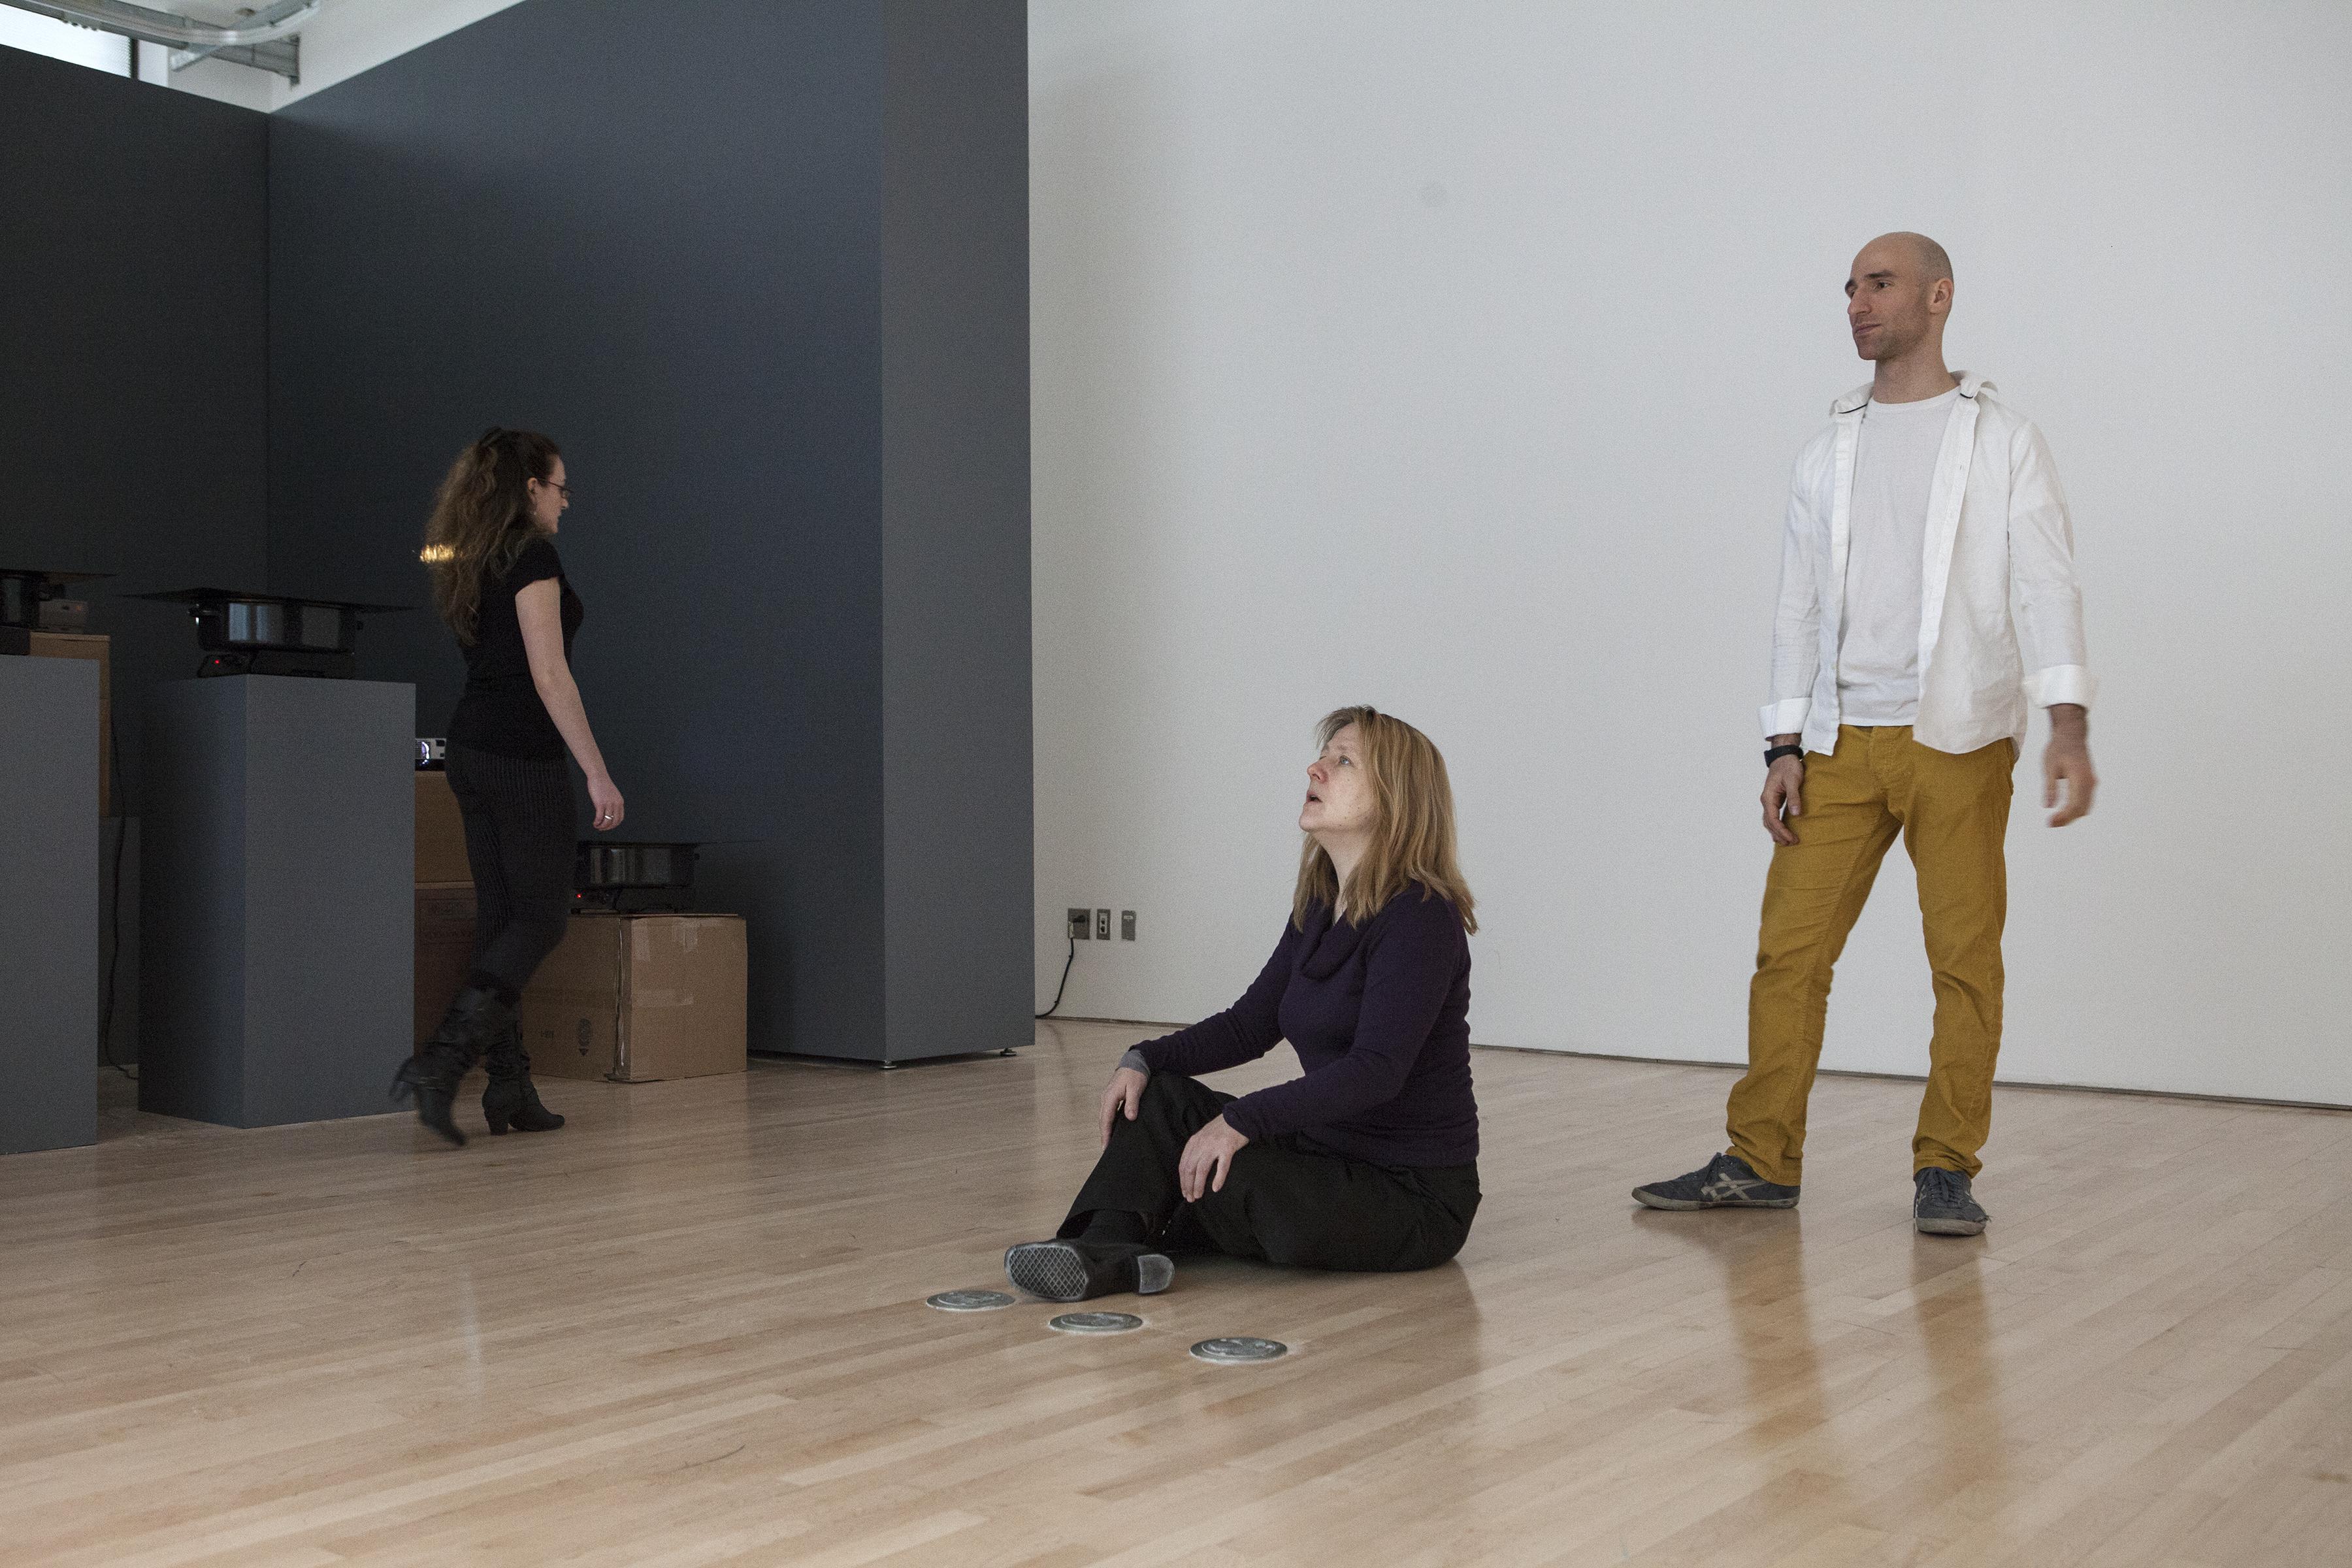 TO BE CONTINUED – CONCERT, THE JAMES GALLERY, NEW YORK